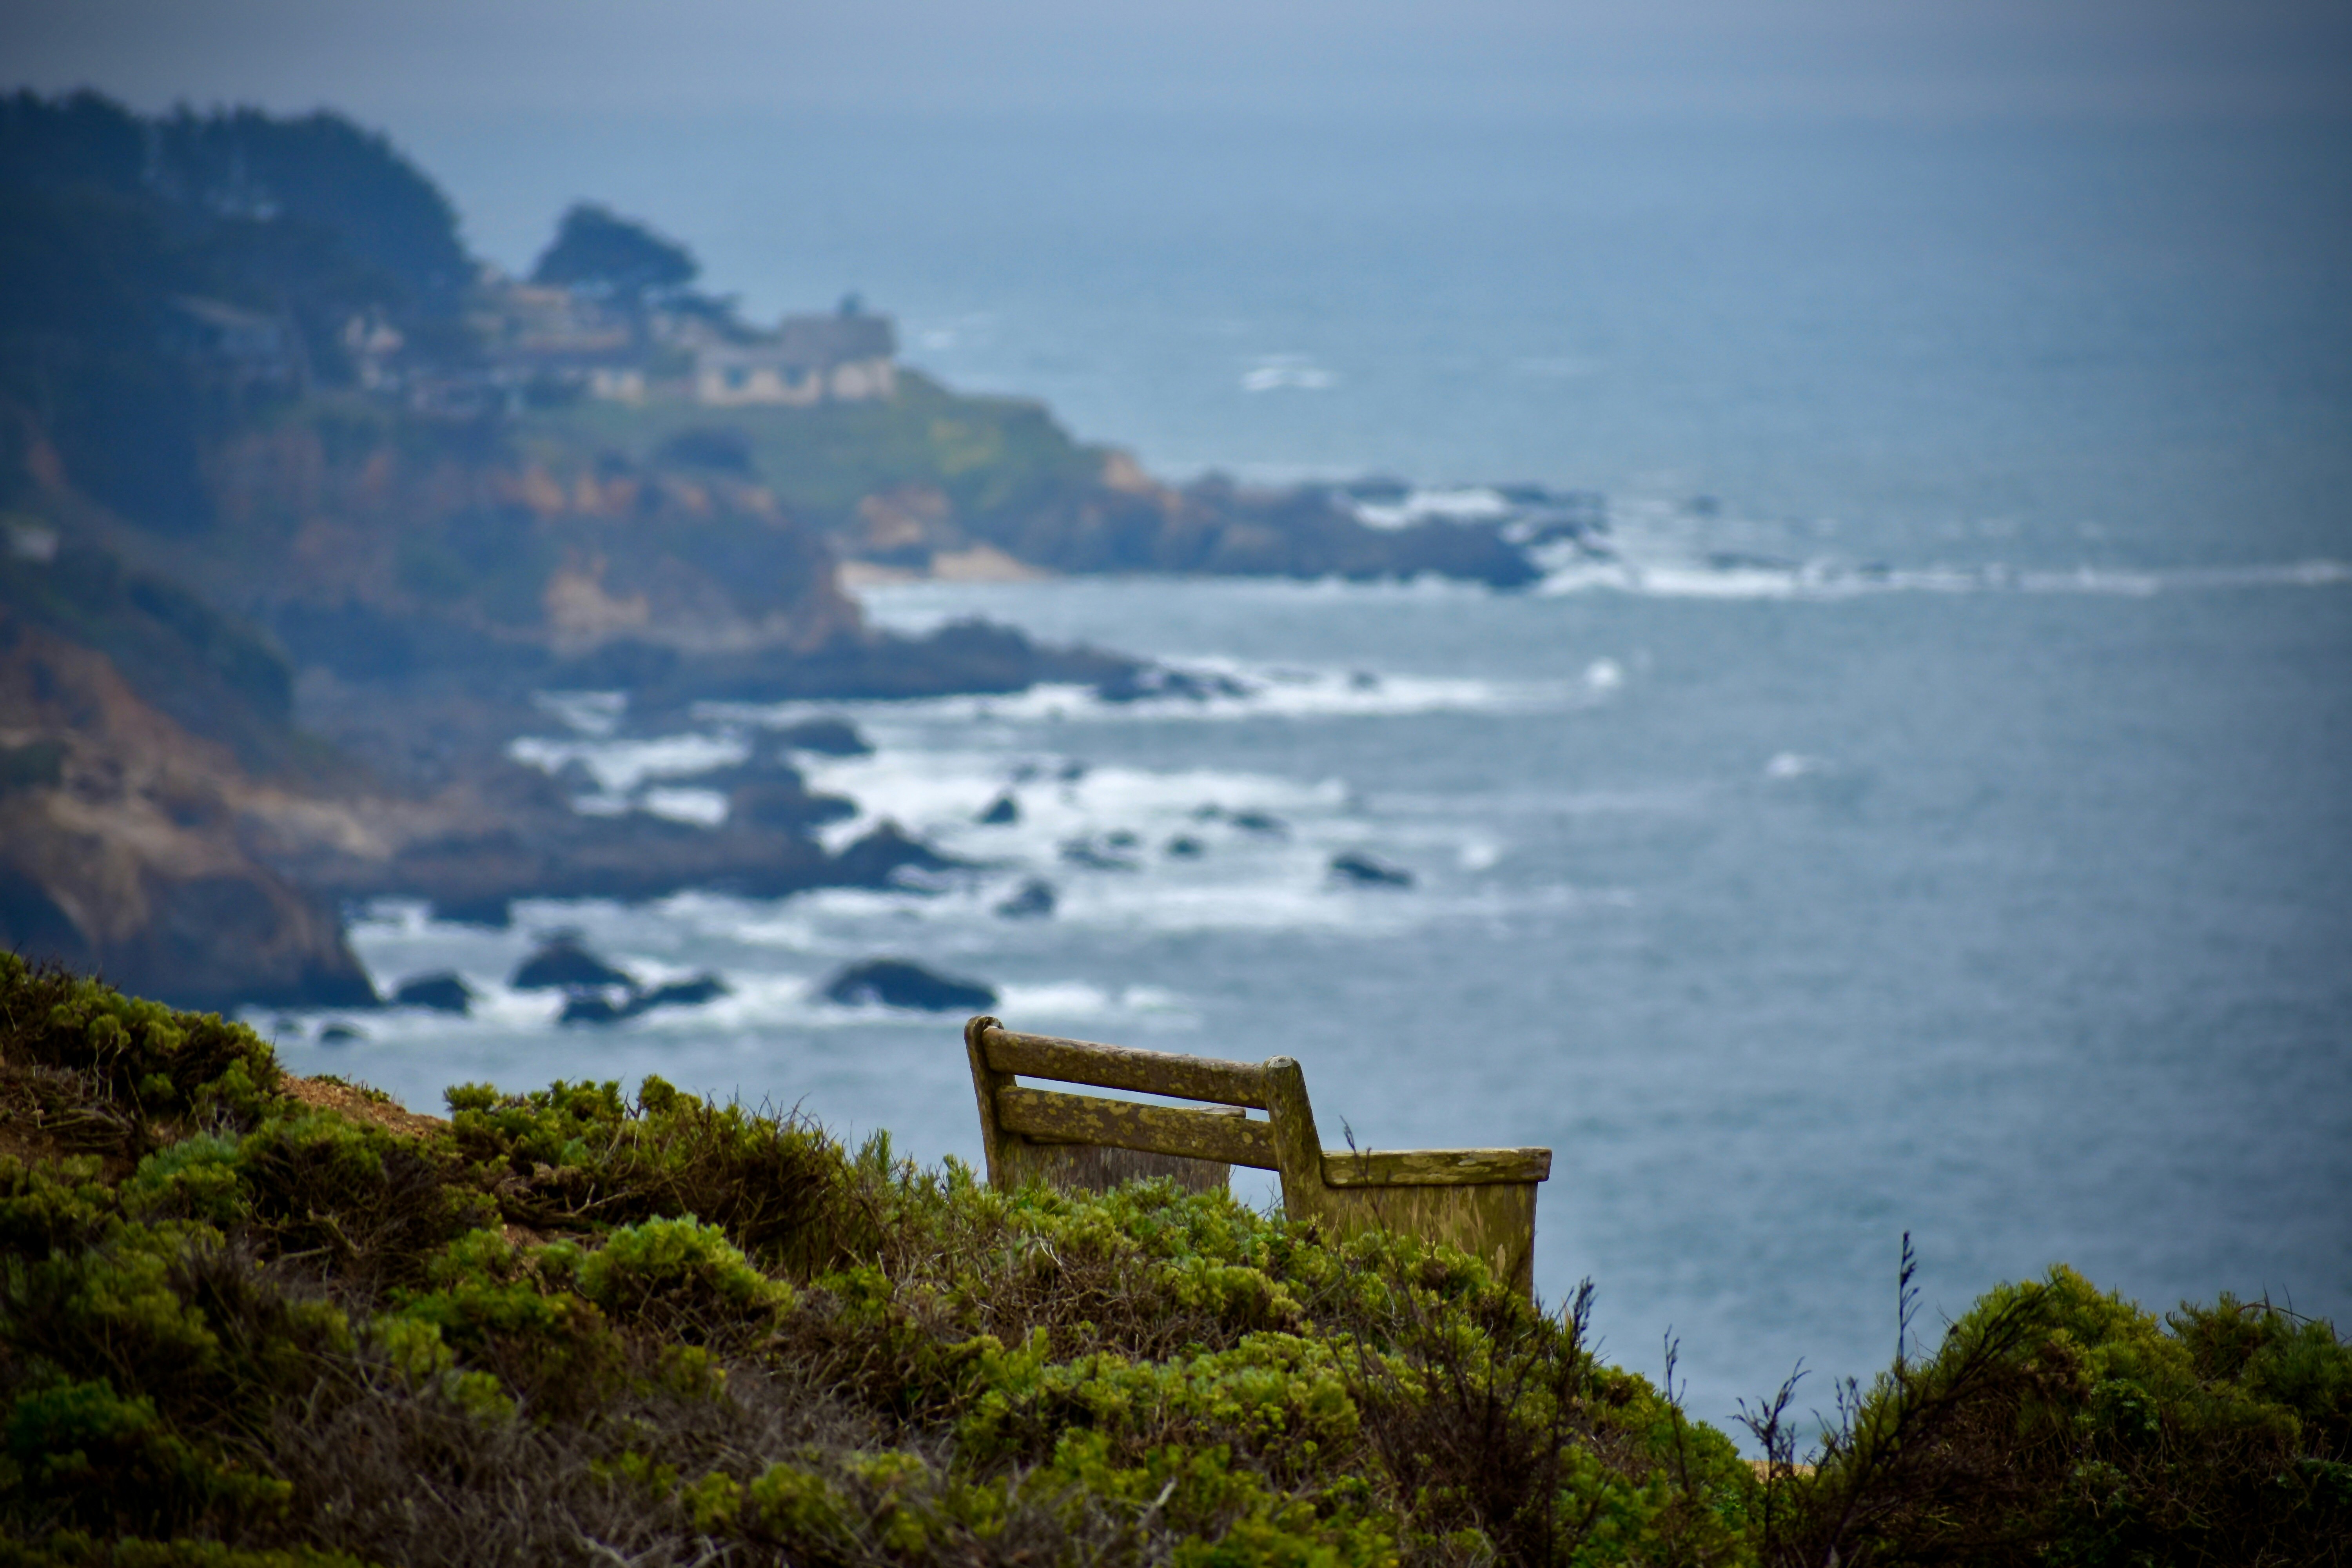 Bench in nature with ocean view in the background